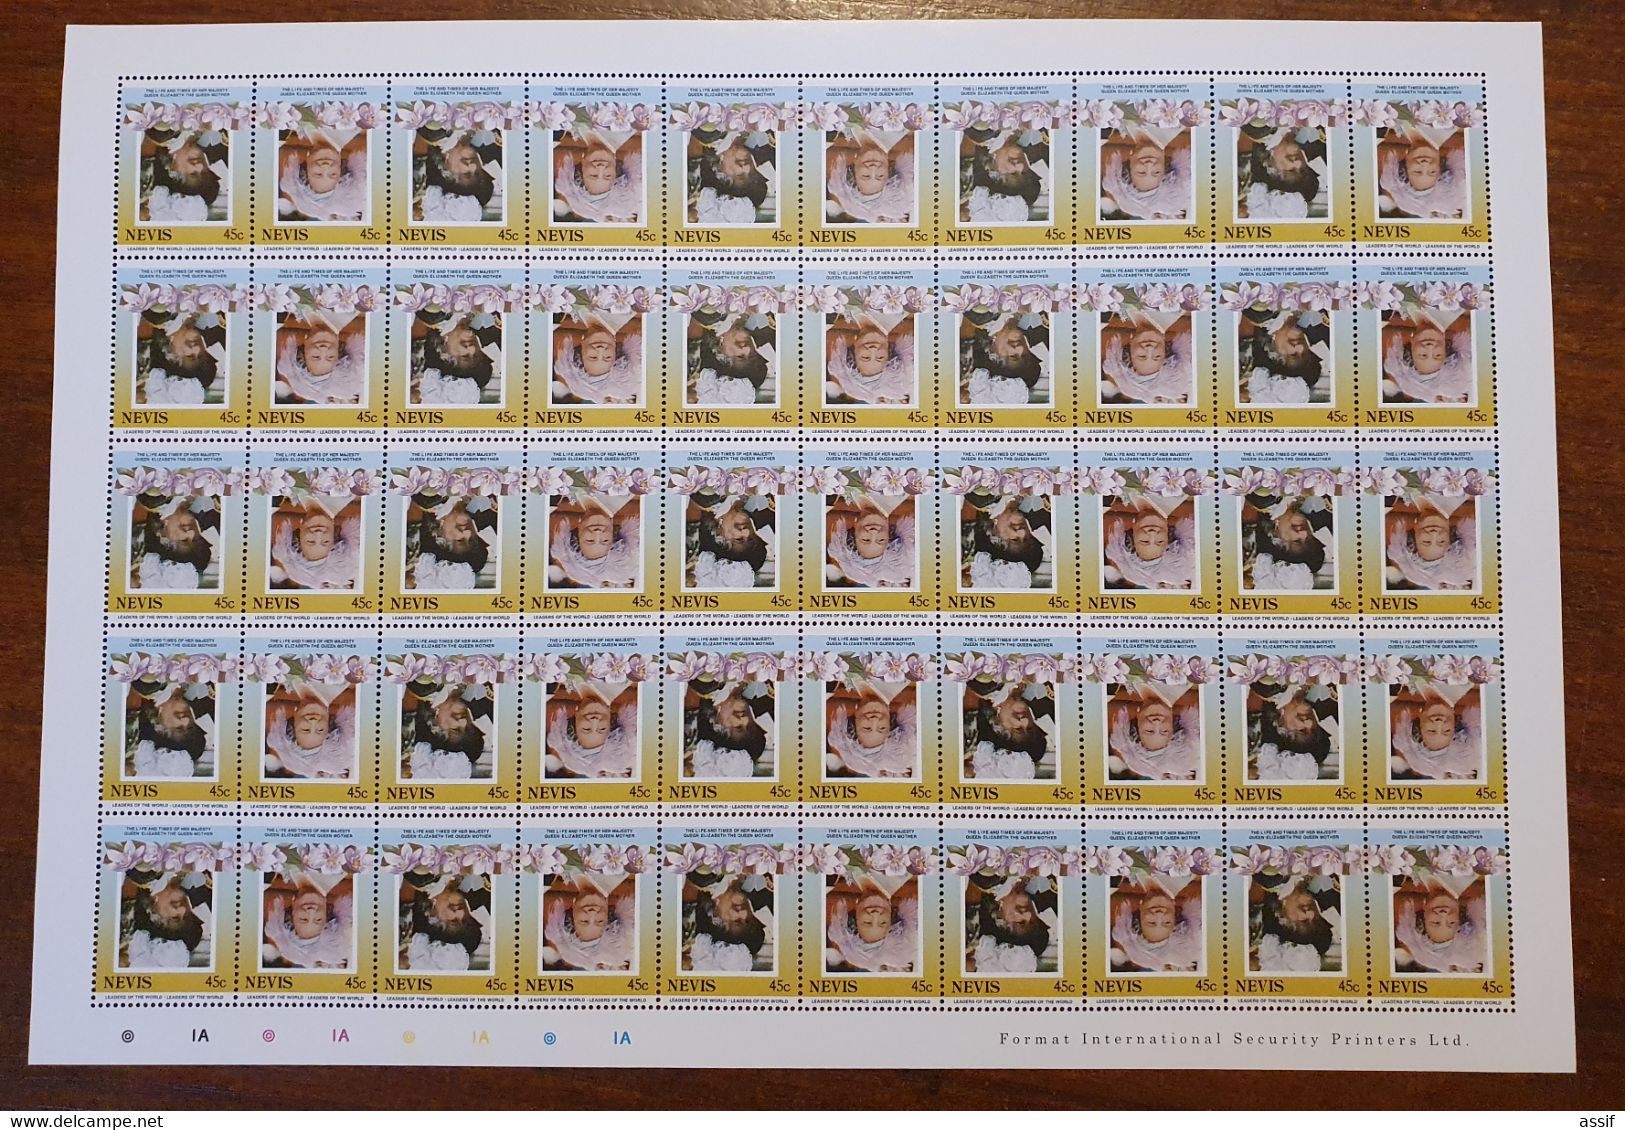 NEVIS 45c 1985 FEUILLE ENTIERE CENTRE RENVERSE SHEET INVERTED YT 311 Et 312 50 TIMBRES NEUFS ** /FREE SHIPPING R - St.Kitts Und Nevis ( 1983-...)